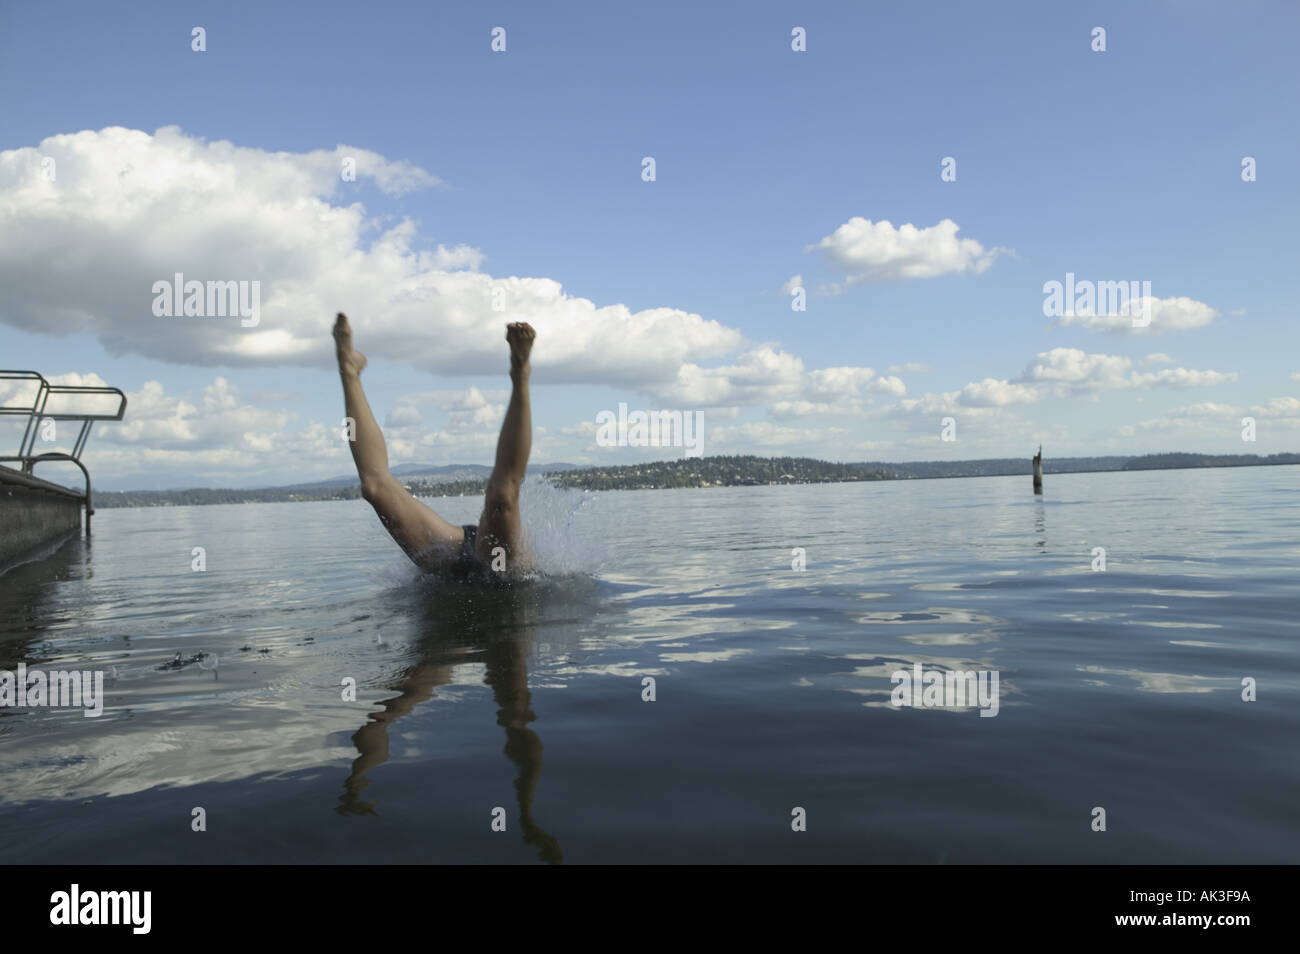 A diver s legs sticking out of a lake Stock Photo